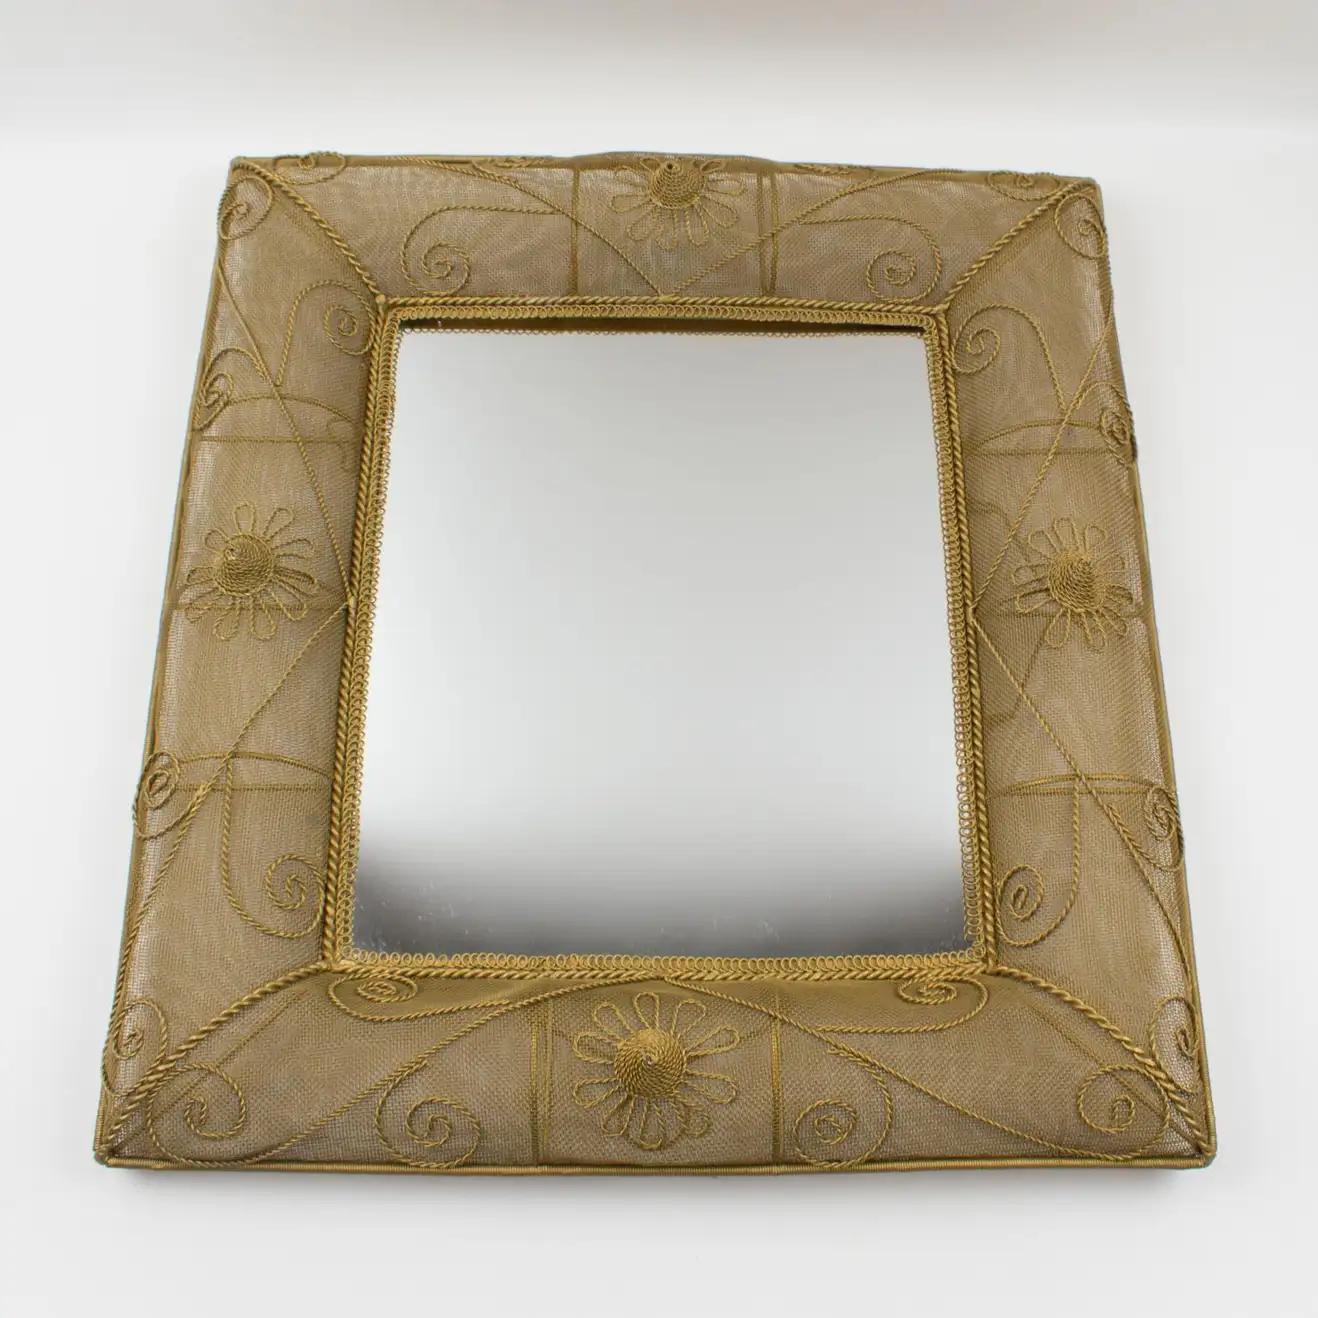 Gilt Metal Wire Mesh Wall Mirror with Floral Decor, 1950s For Sale 6